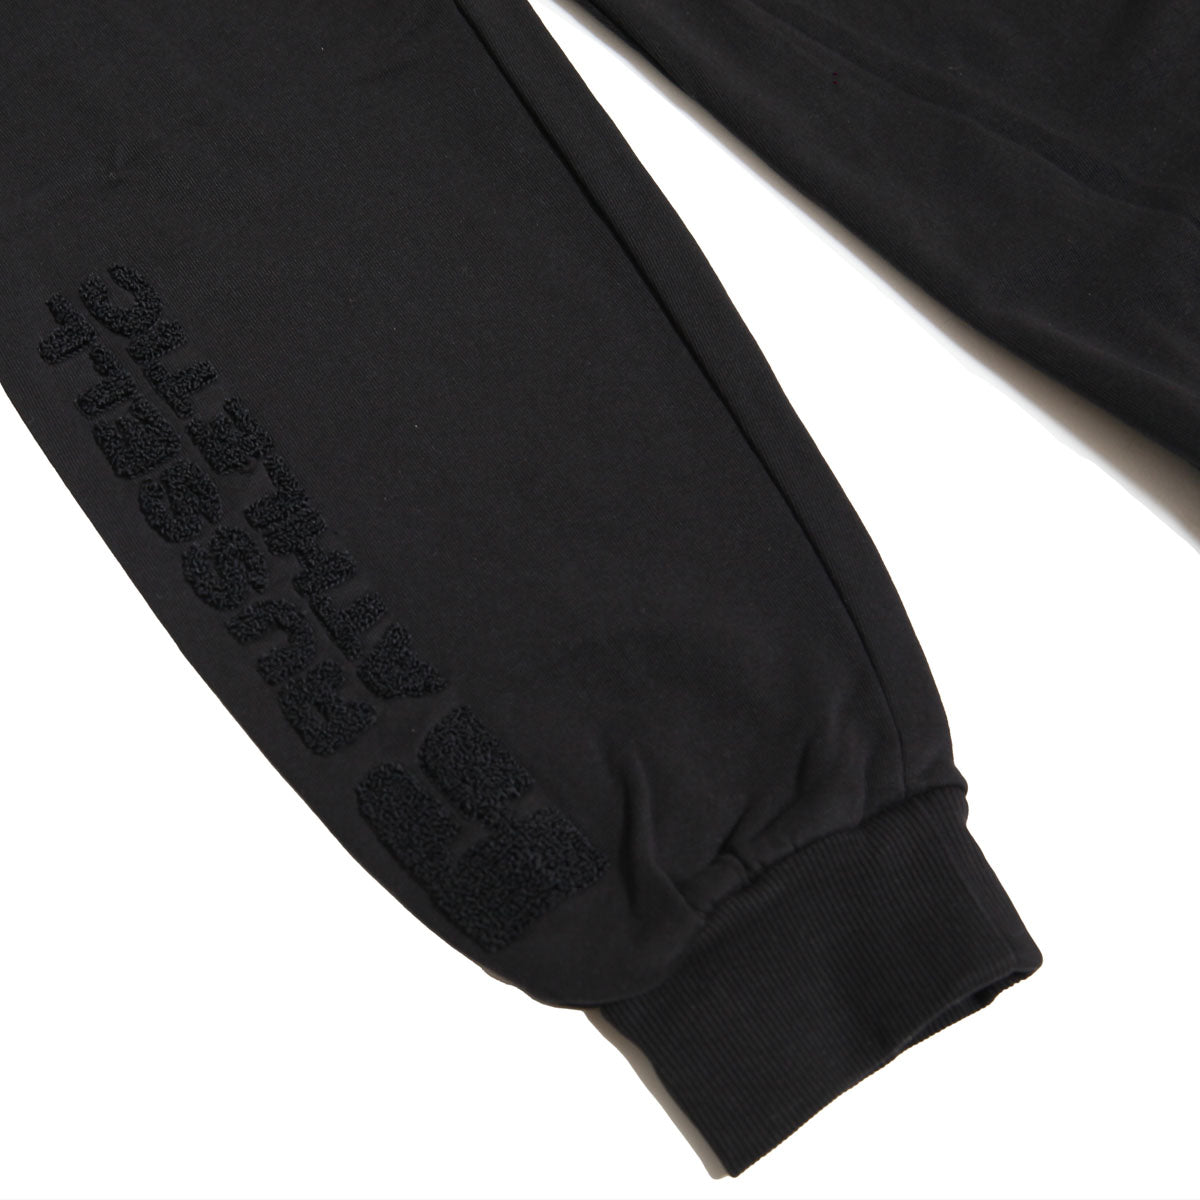 Russell Athletic Maurice Jogger Black